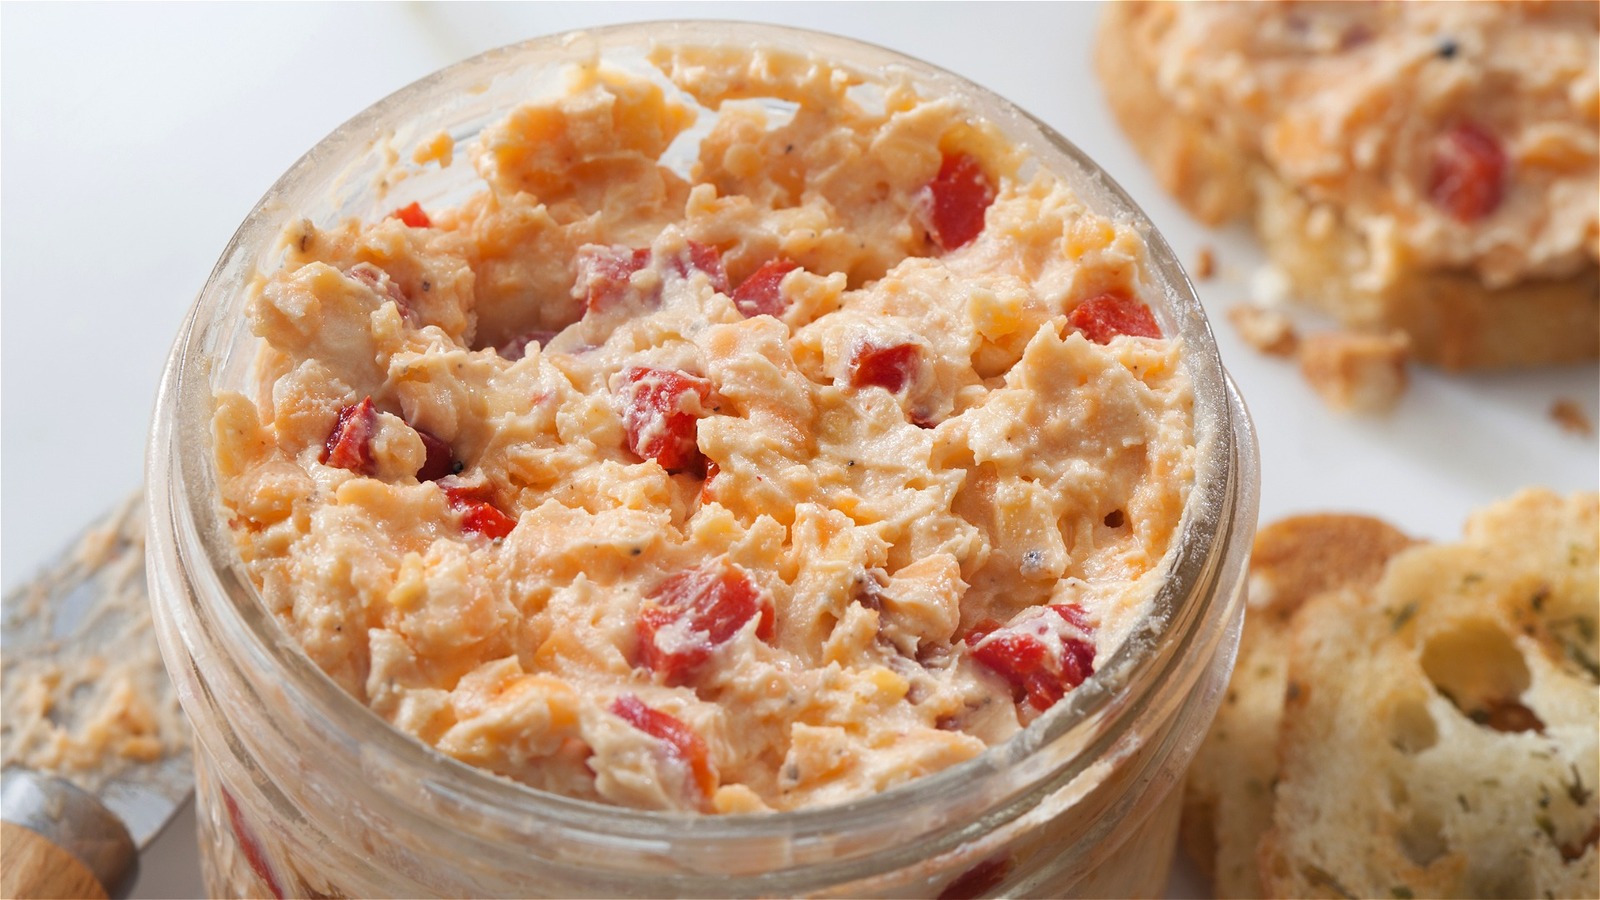 What Exactly Is Pimento Cheese And How Is It Used?